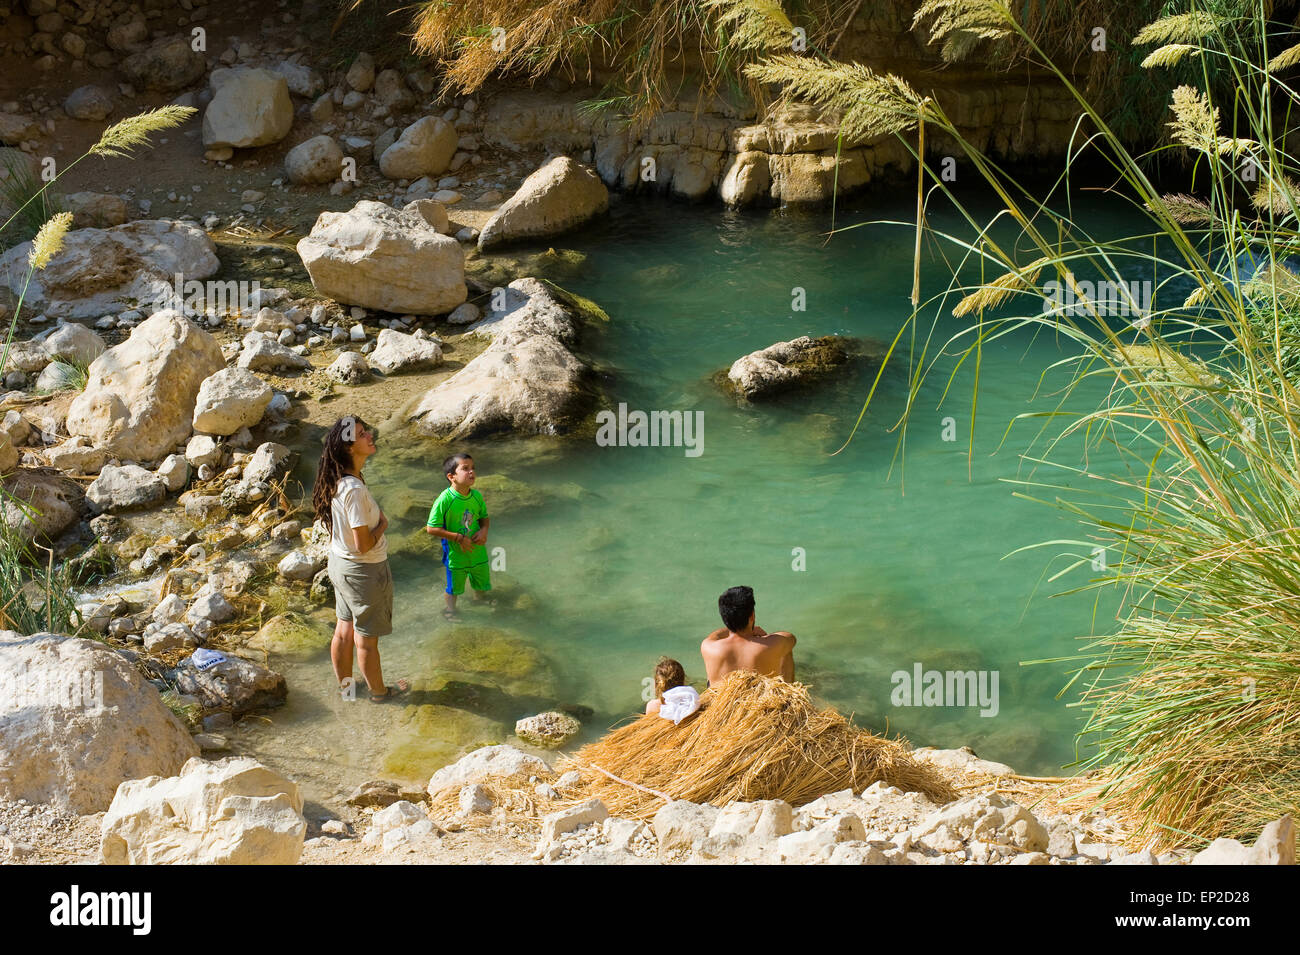 A family is relaxing in the water of the oasis Ein Gedi close to the dead sea in Israel Stock Photo